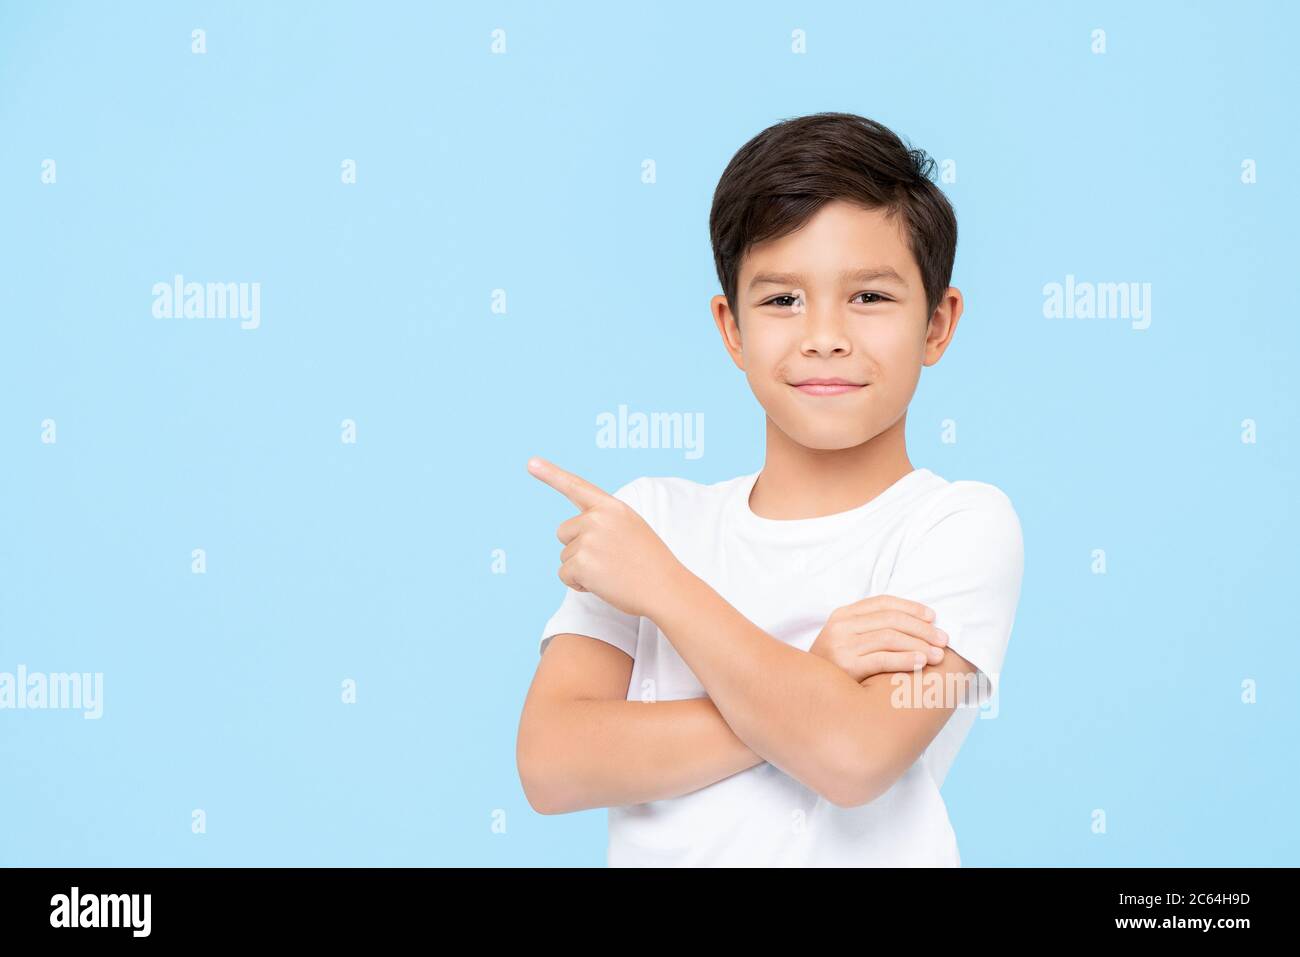 Close-up portrait of smiling young boy pointing finger on blank space beside in blue isolated background Stock Photo